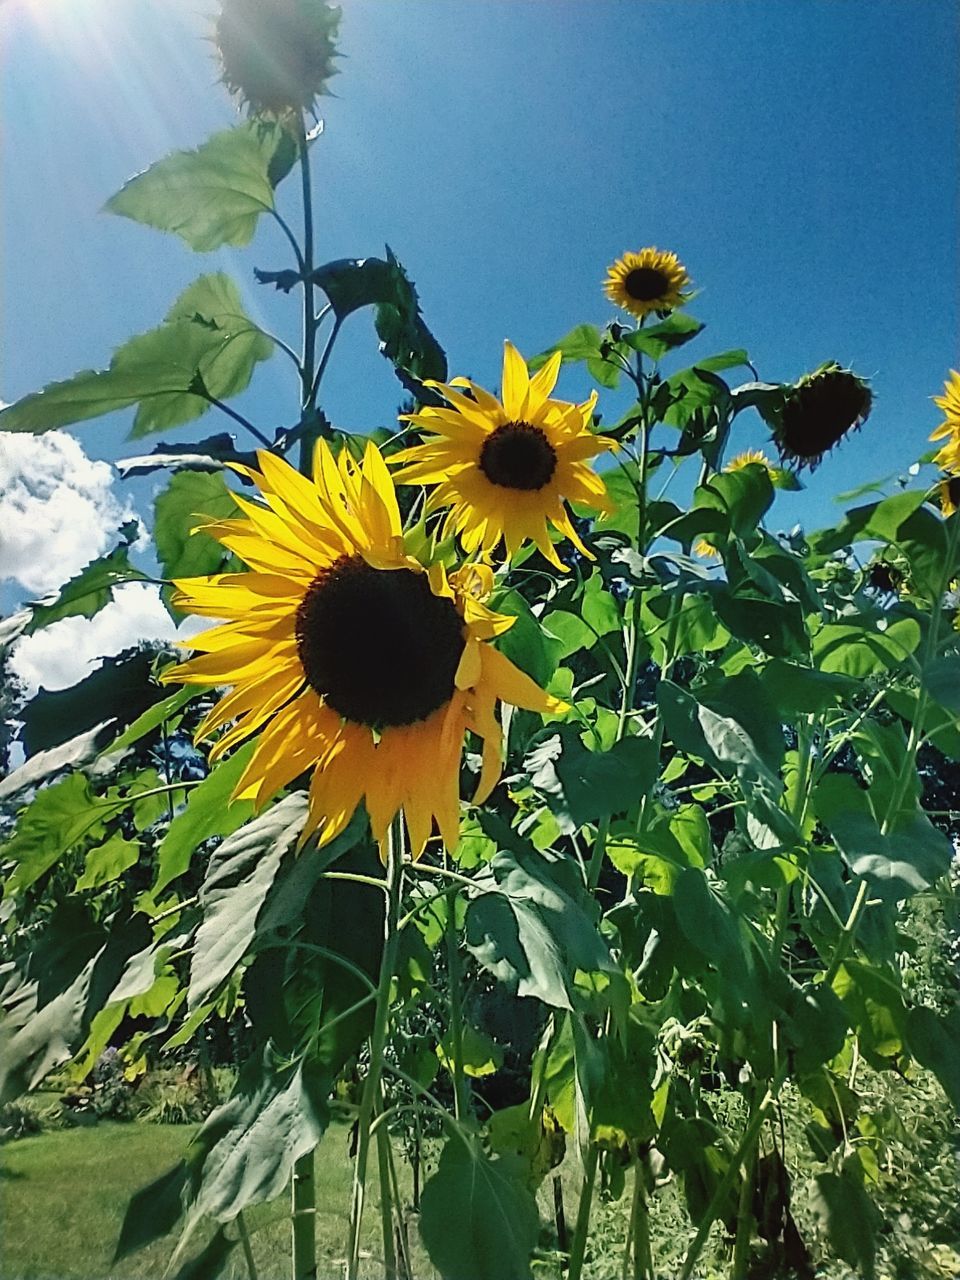 sunflower, plant, flower, flowering plant, beauty in nature, freshness, growth, flower head, nature, yellow, fragility, field, inflorescence, petal, sky, leaf, plant part, no people, asterales, sunflower seed, close-up, sunlight, low angle view, day, outdoors, green, springtime, pollen, land, landscape, botany, rural scene, blossom